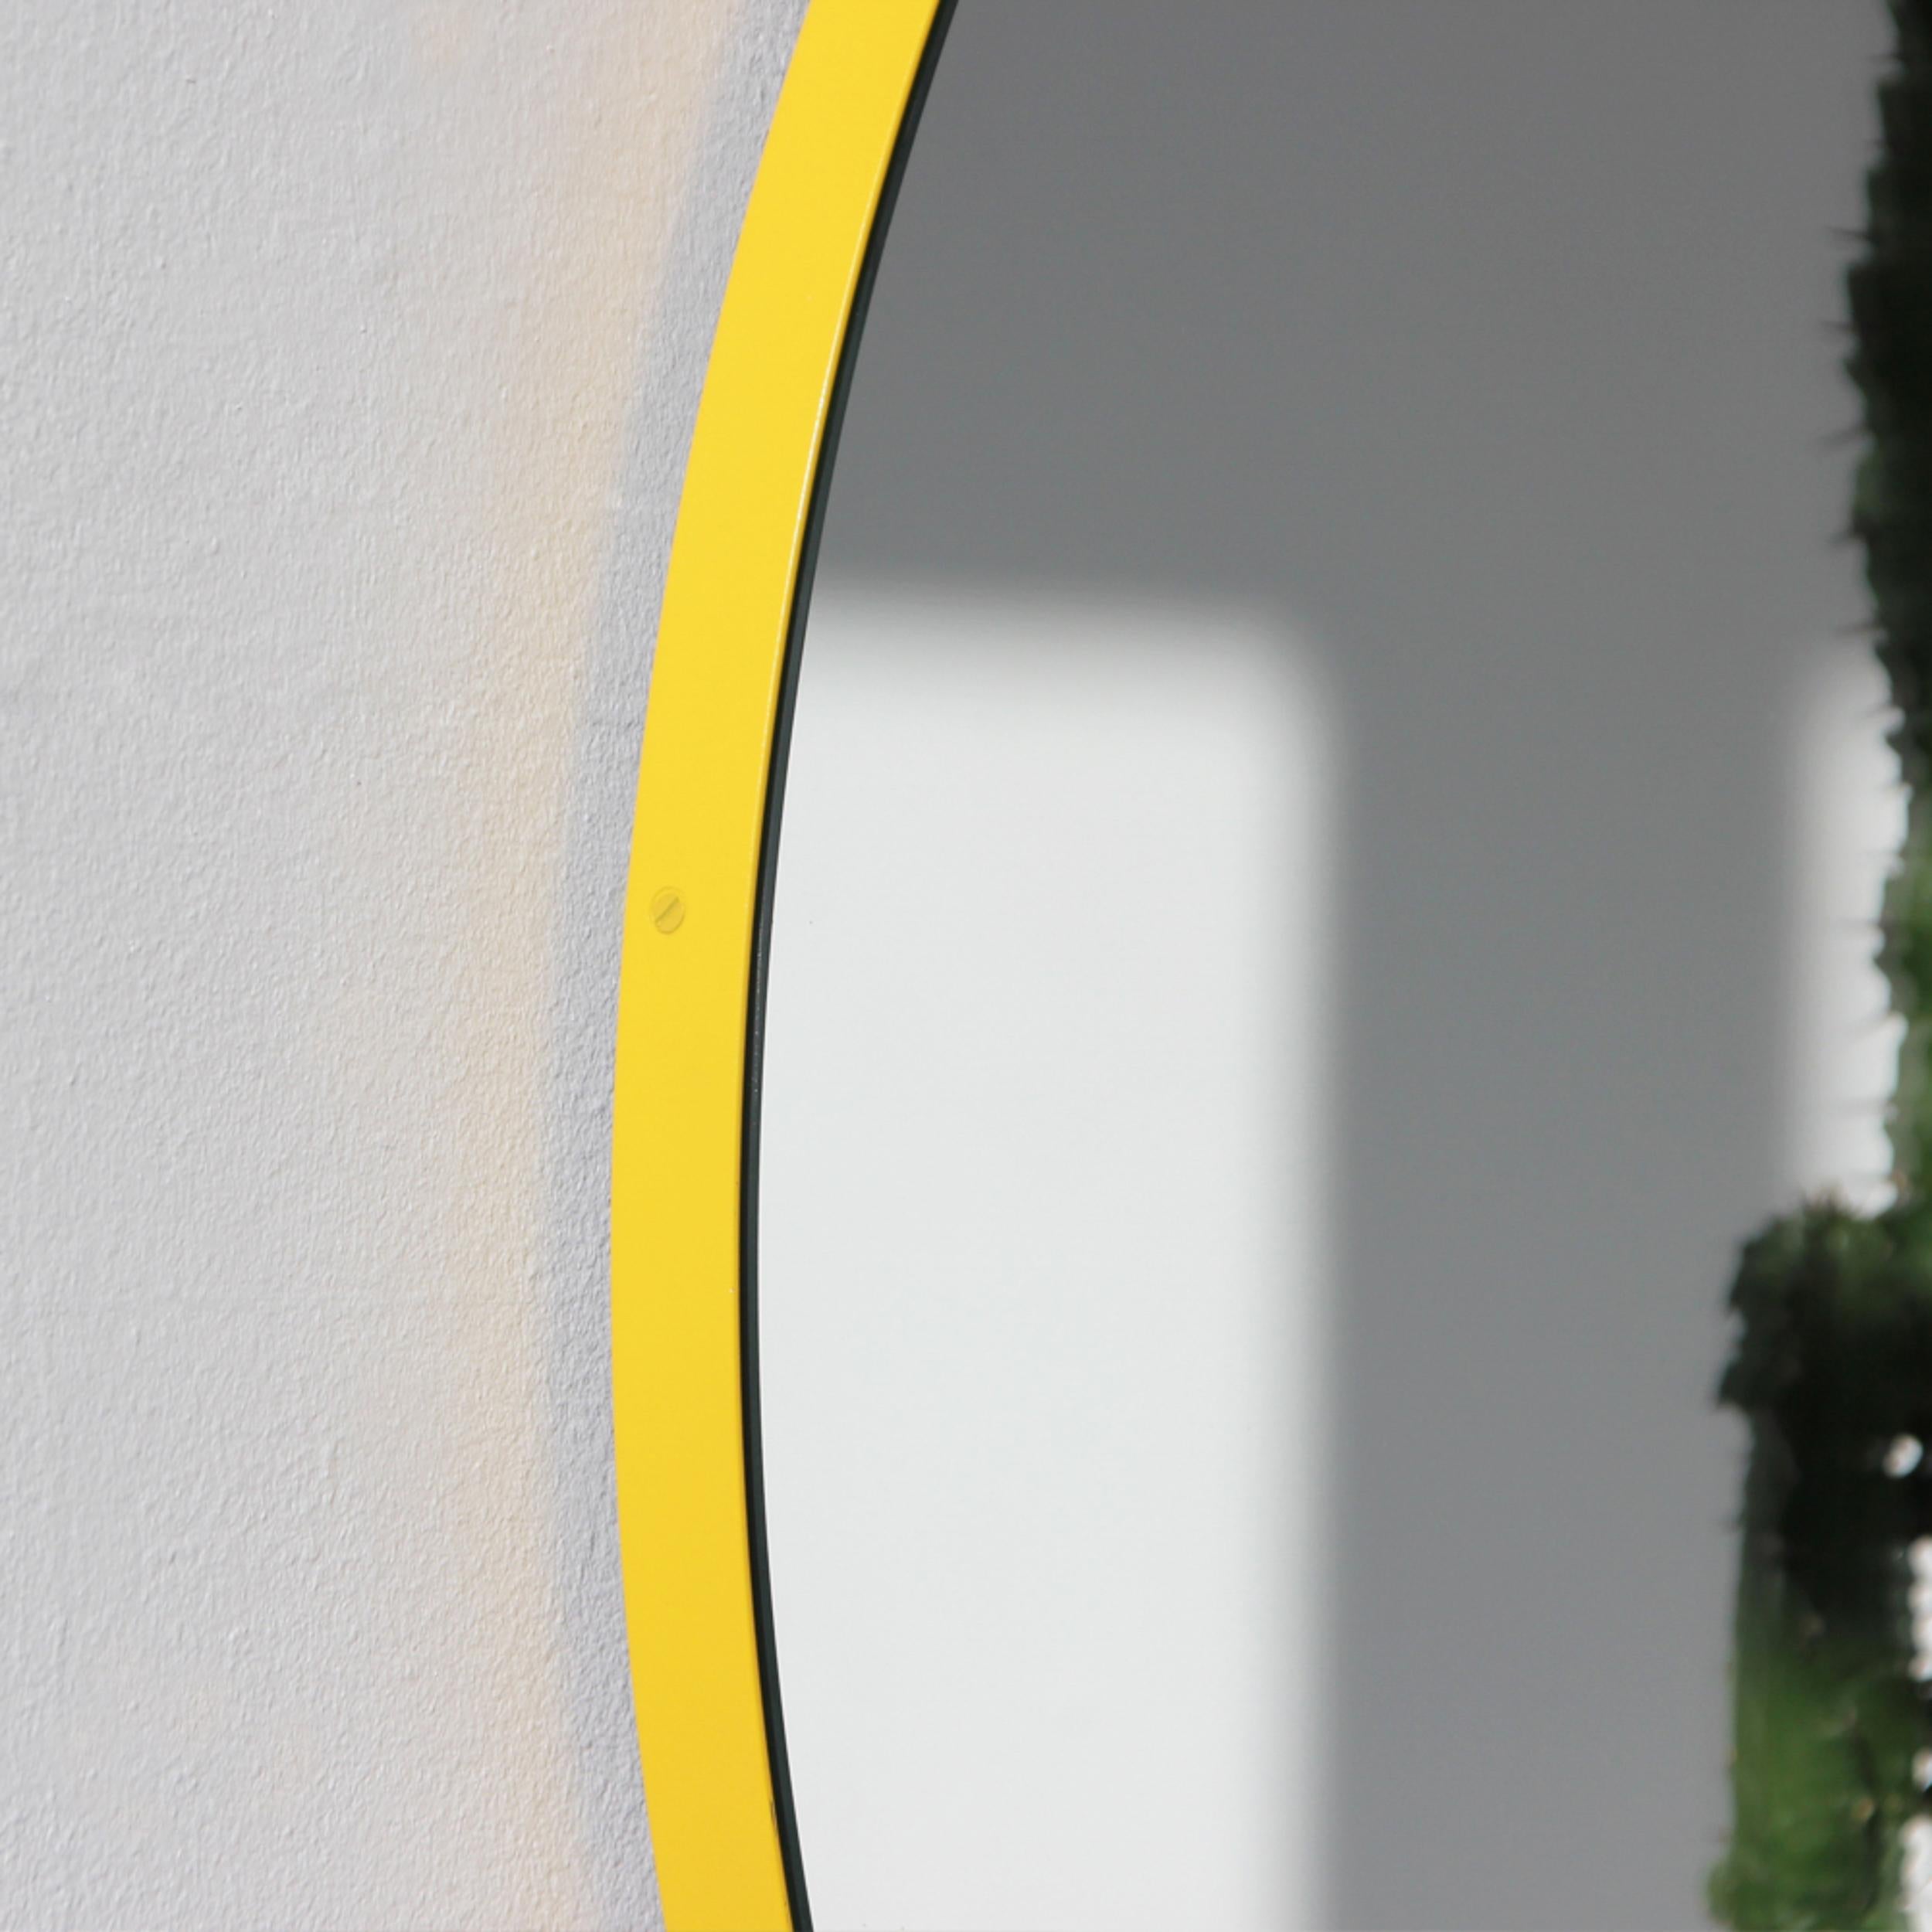 Powder-Coated Orbis Round Mirror with Contemporary Yellow Frame, Regular For Sale